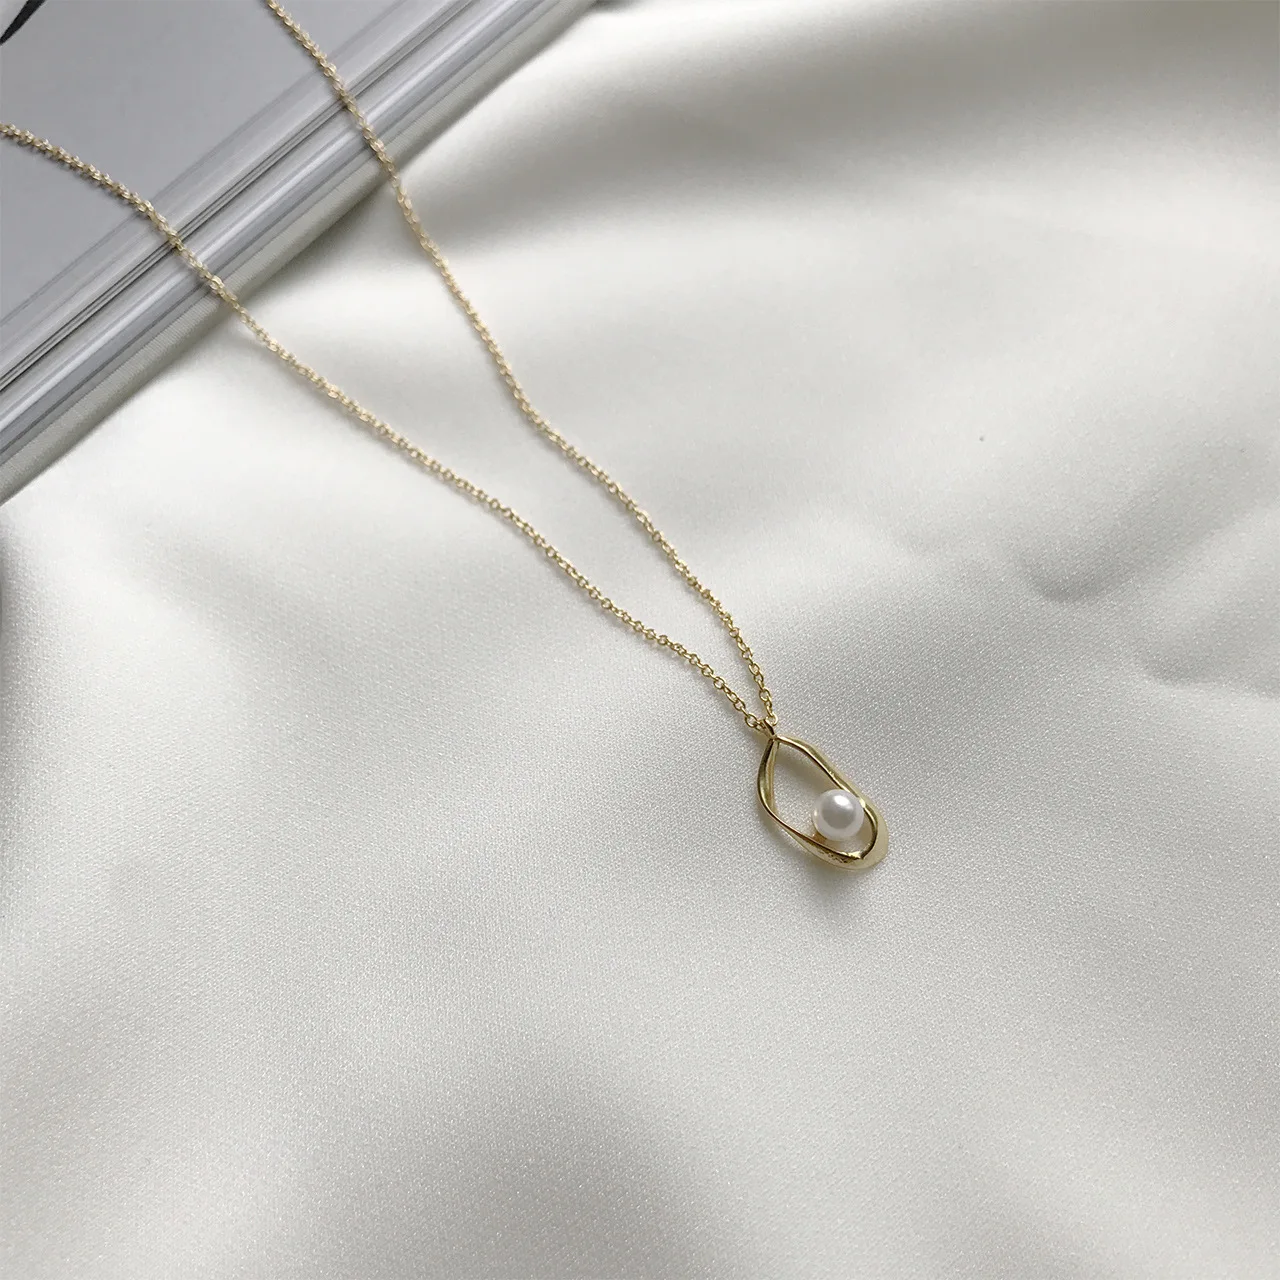 Light Luxury S925 Silver Irregular Pearl Necklaces Sterling Silver Geometric Pearl Pendant Necklace For Mom